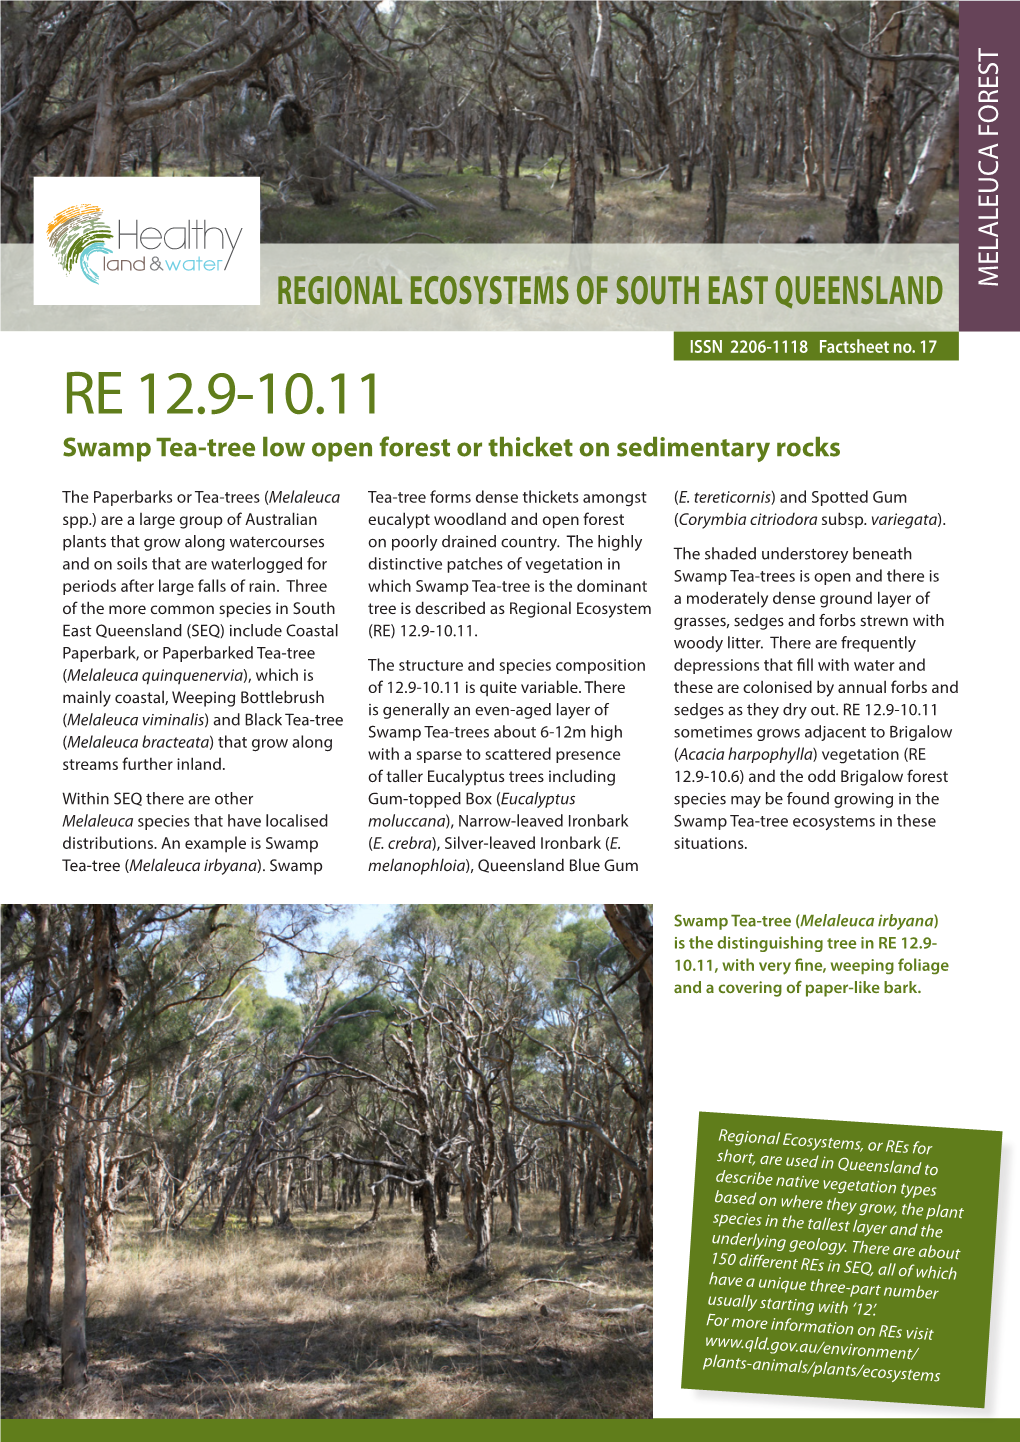 RE 12.9-10.11 Swamp Tea-Tree Low Open Forest Or Thicket on Sedimentary Rocks